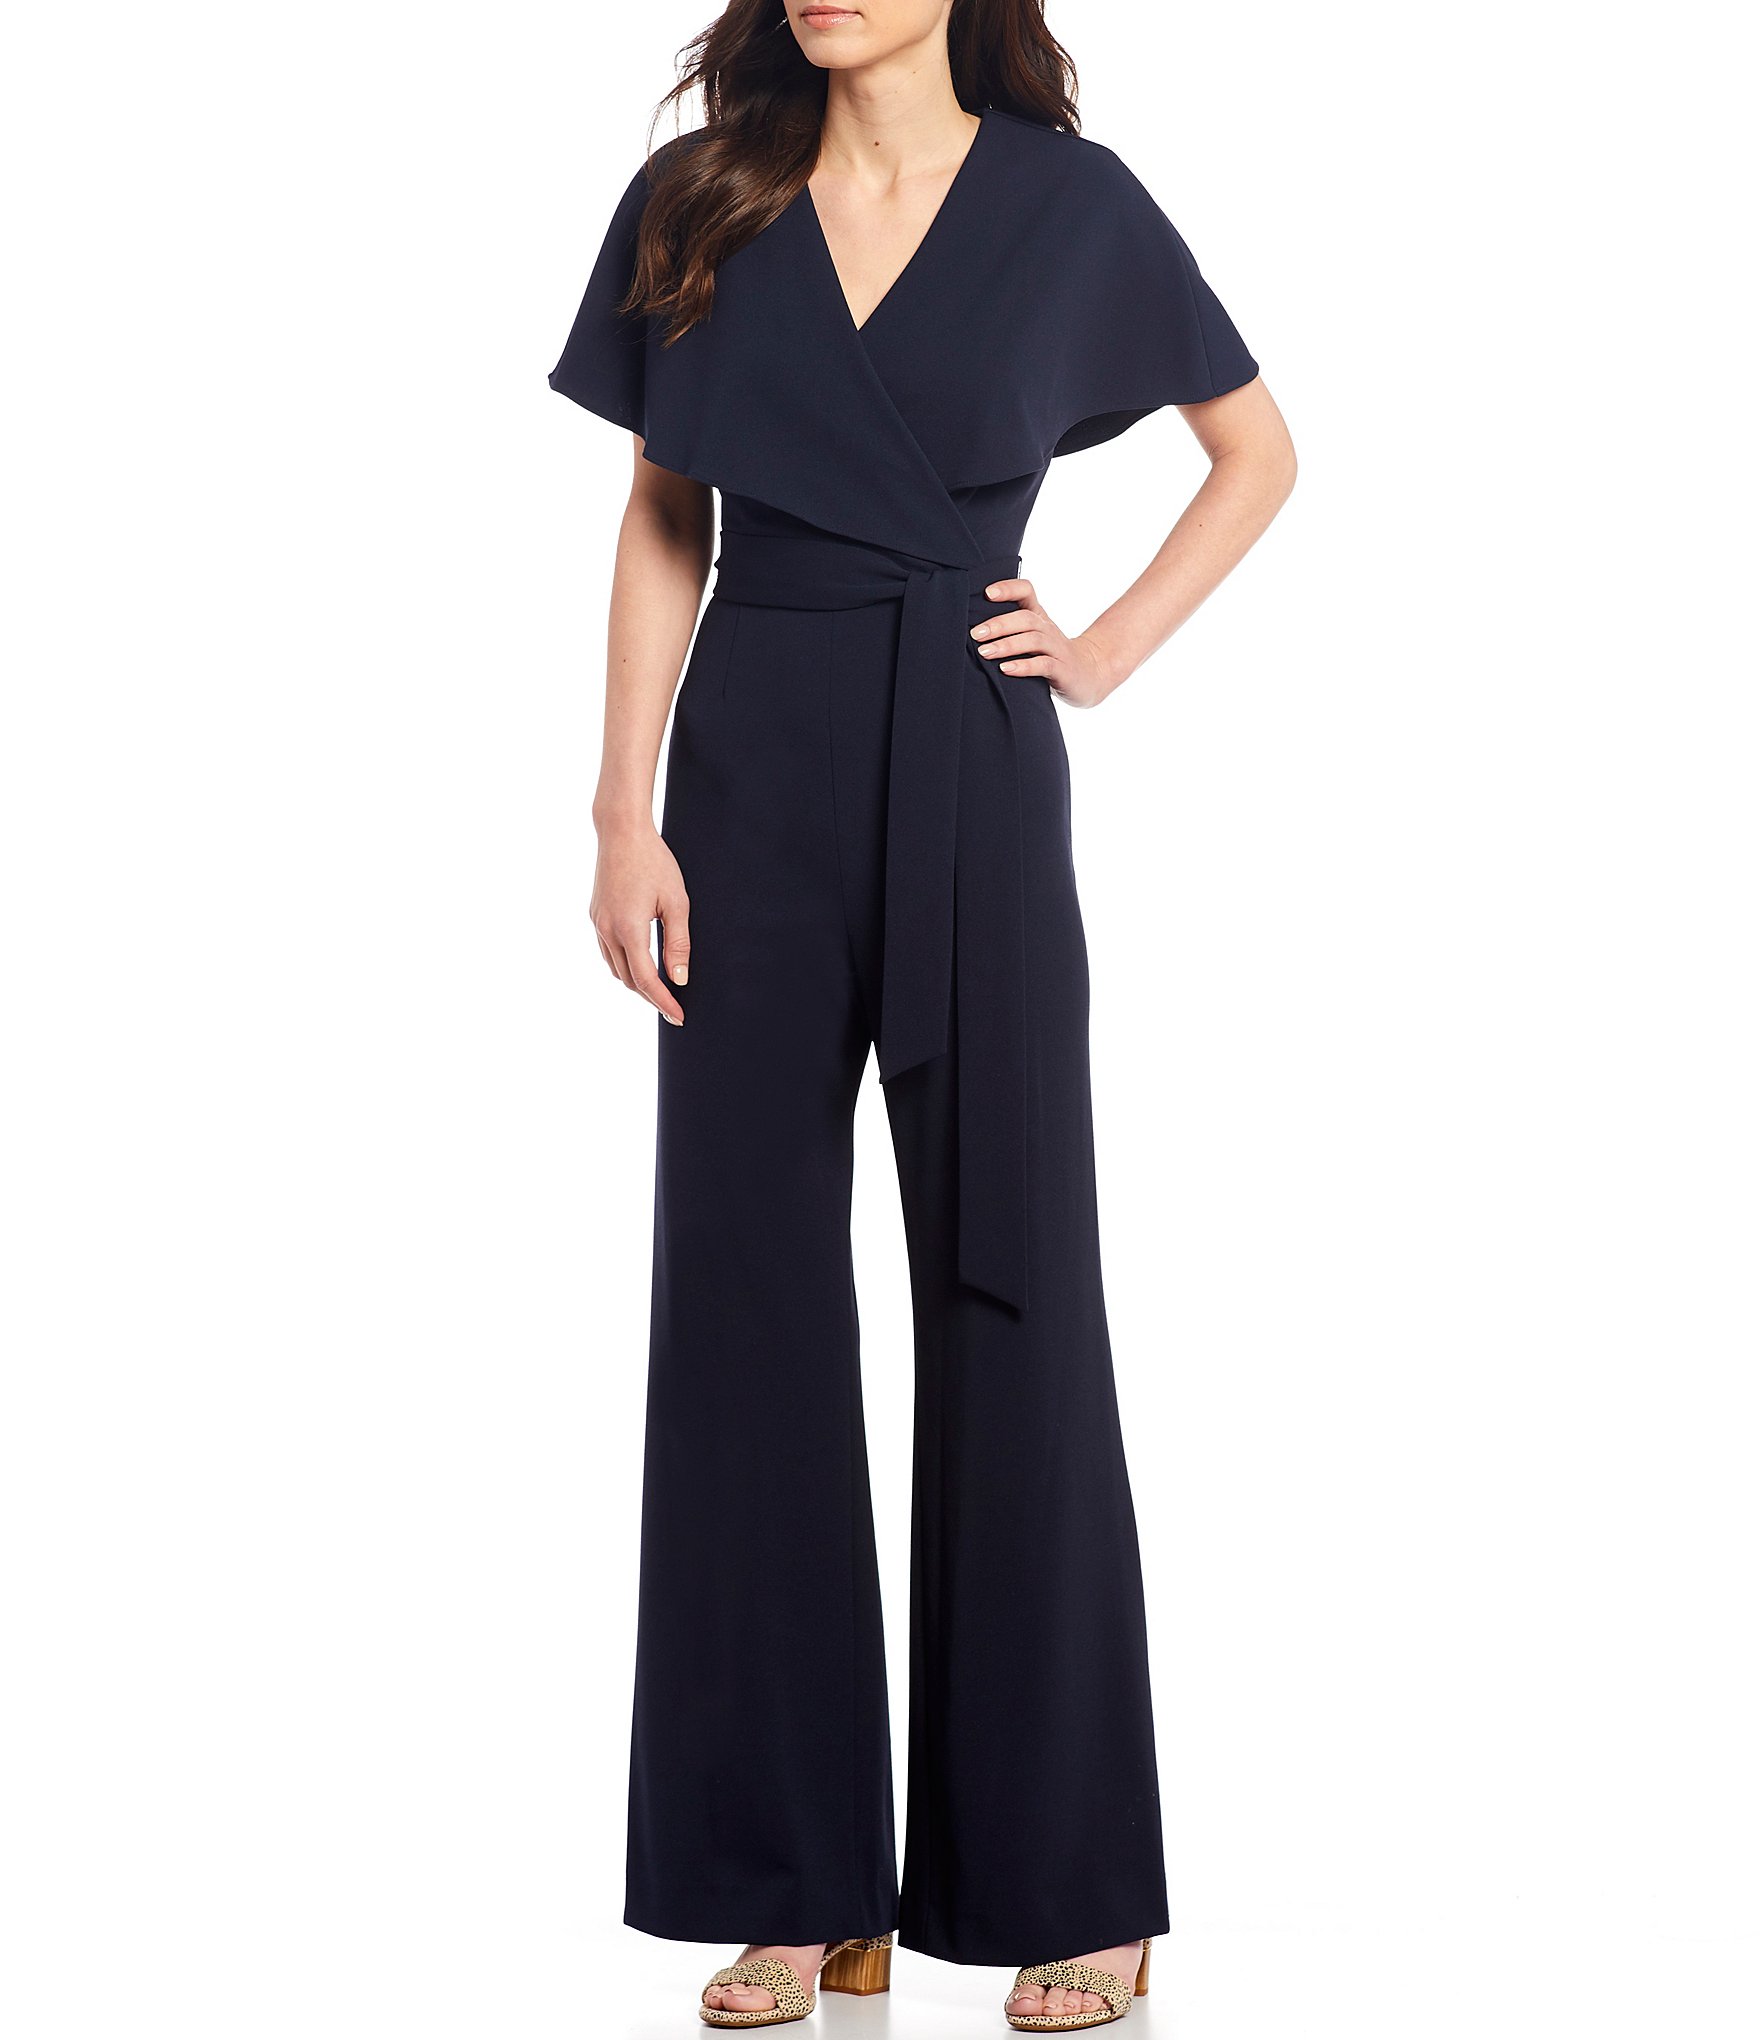 navy blue: Women's Jumpsuits ☀ Rompers ...